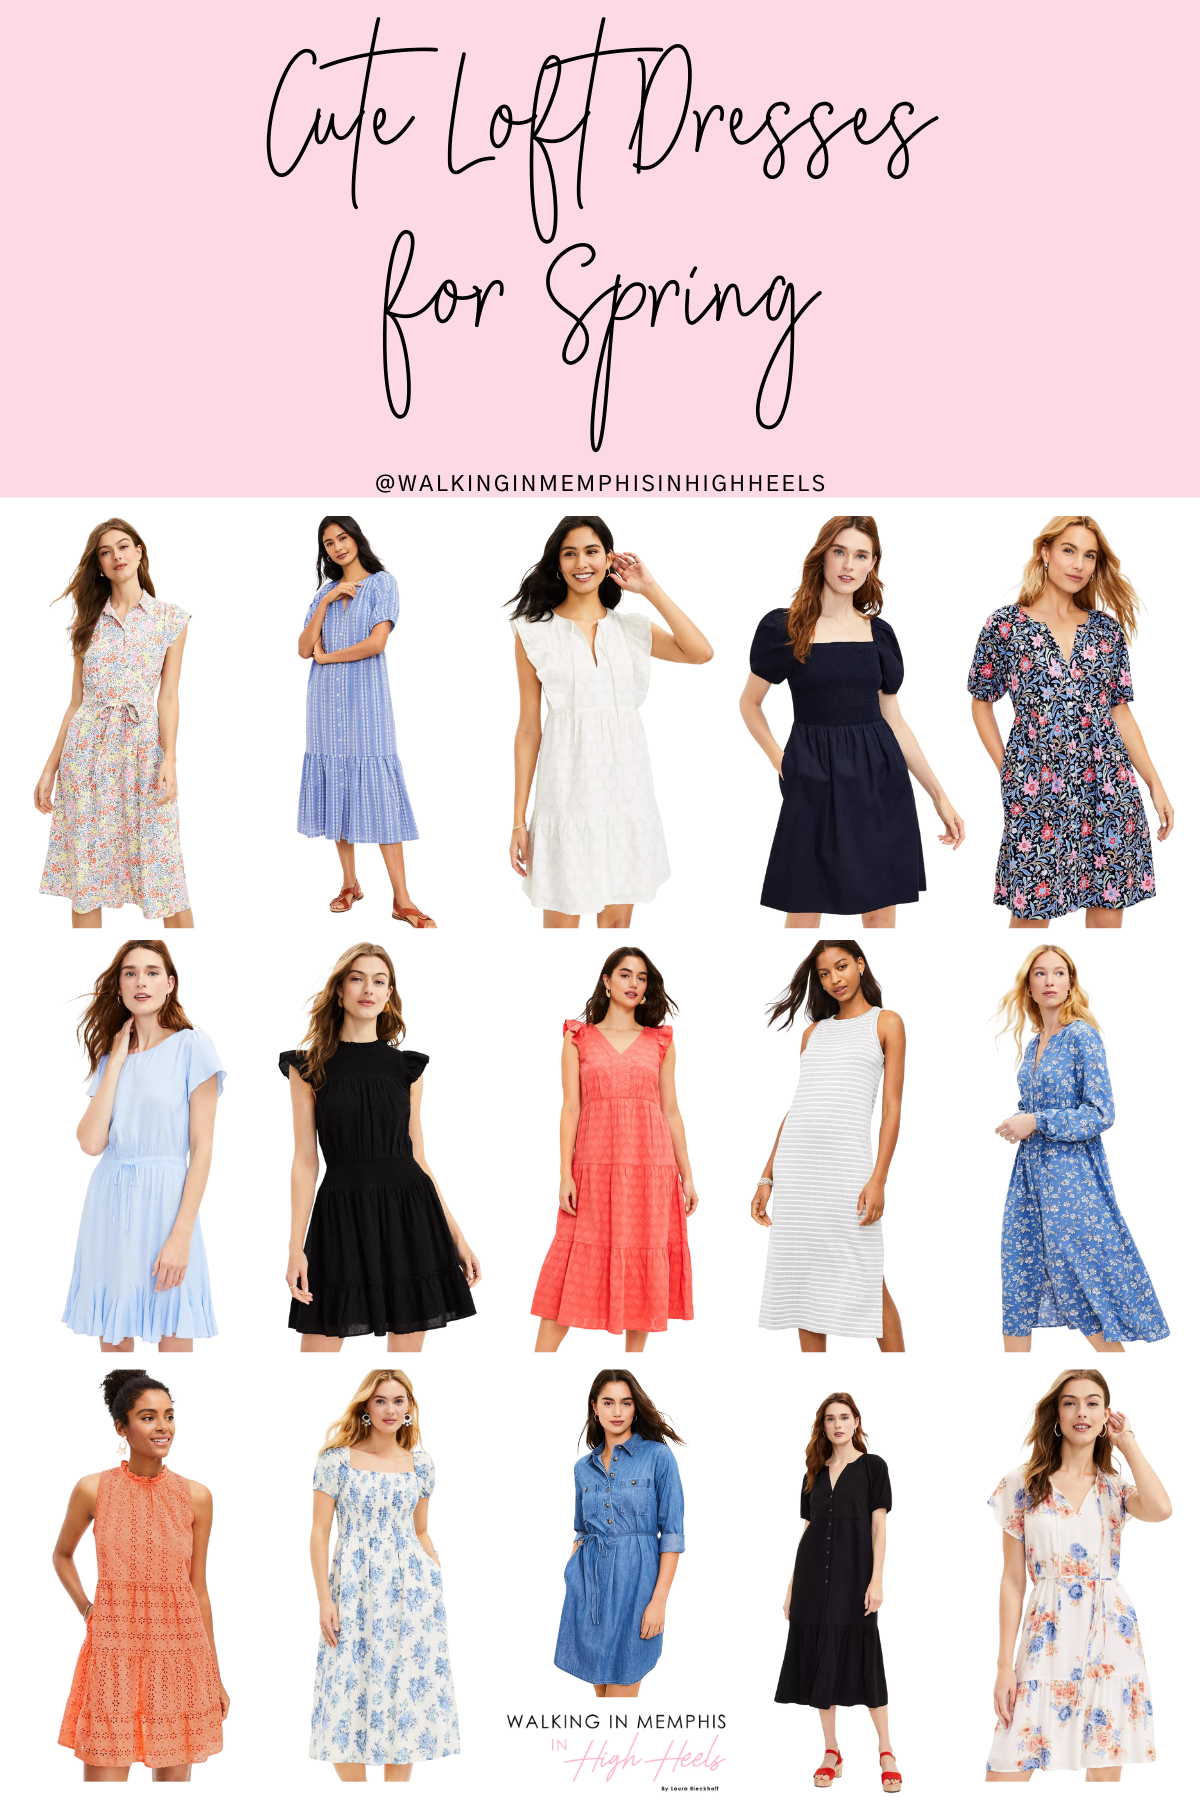 Loft Dresses for Spring featured by top US mom fashion blogger, Walking in Memphis in High Heels.